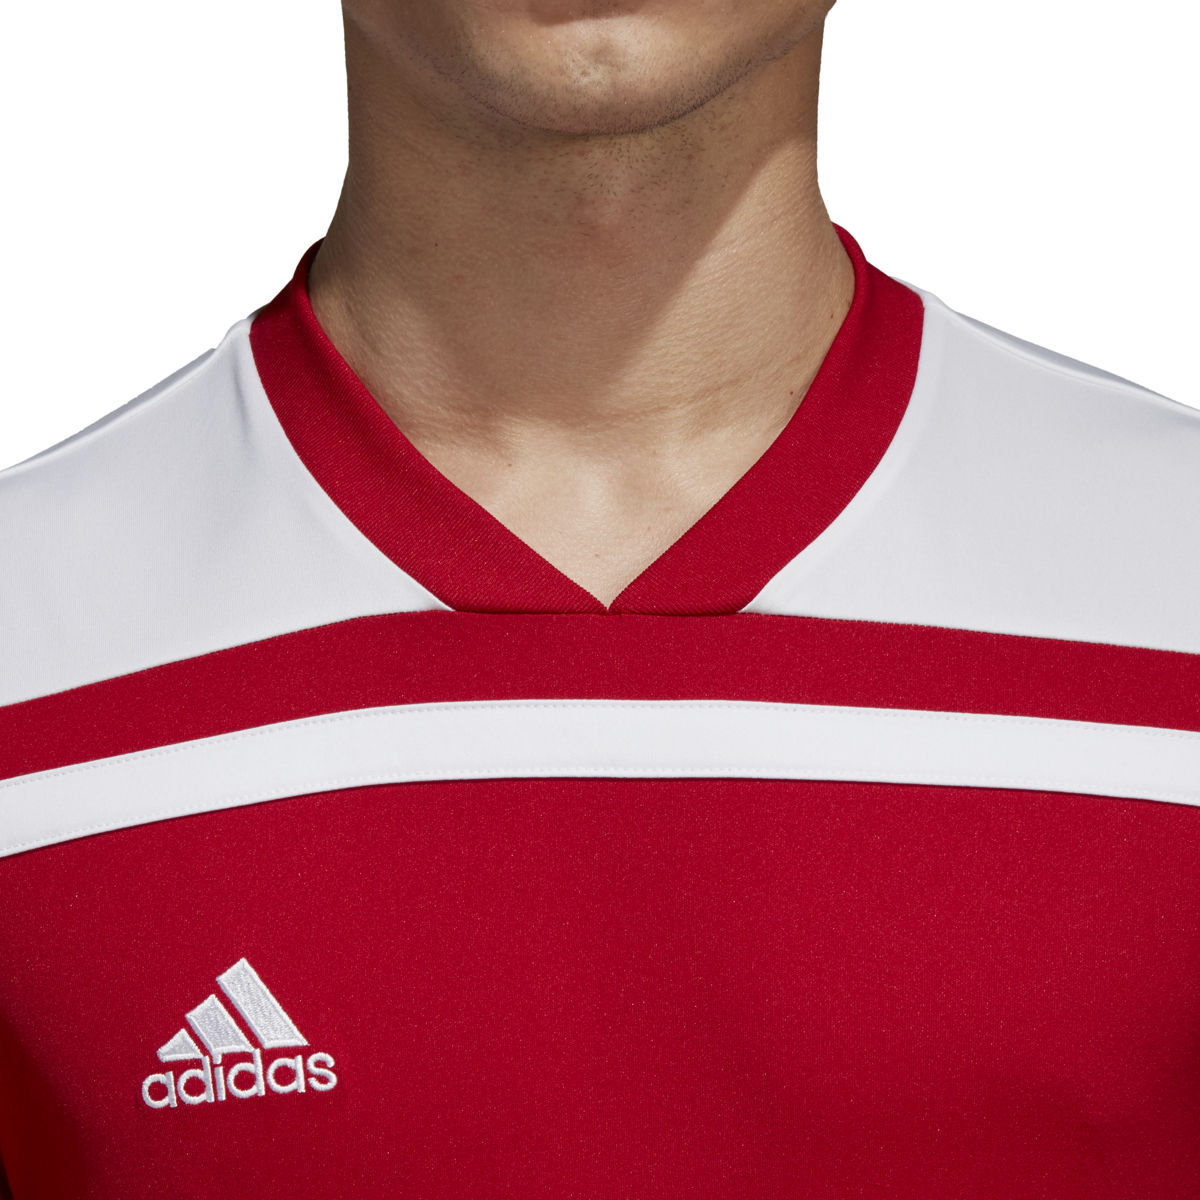 Adidas Mens Soccer Regista 18 Jersey Adidas - Ships Directly From Adidas - image 5 of 6